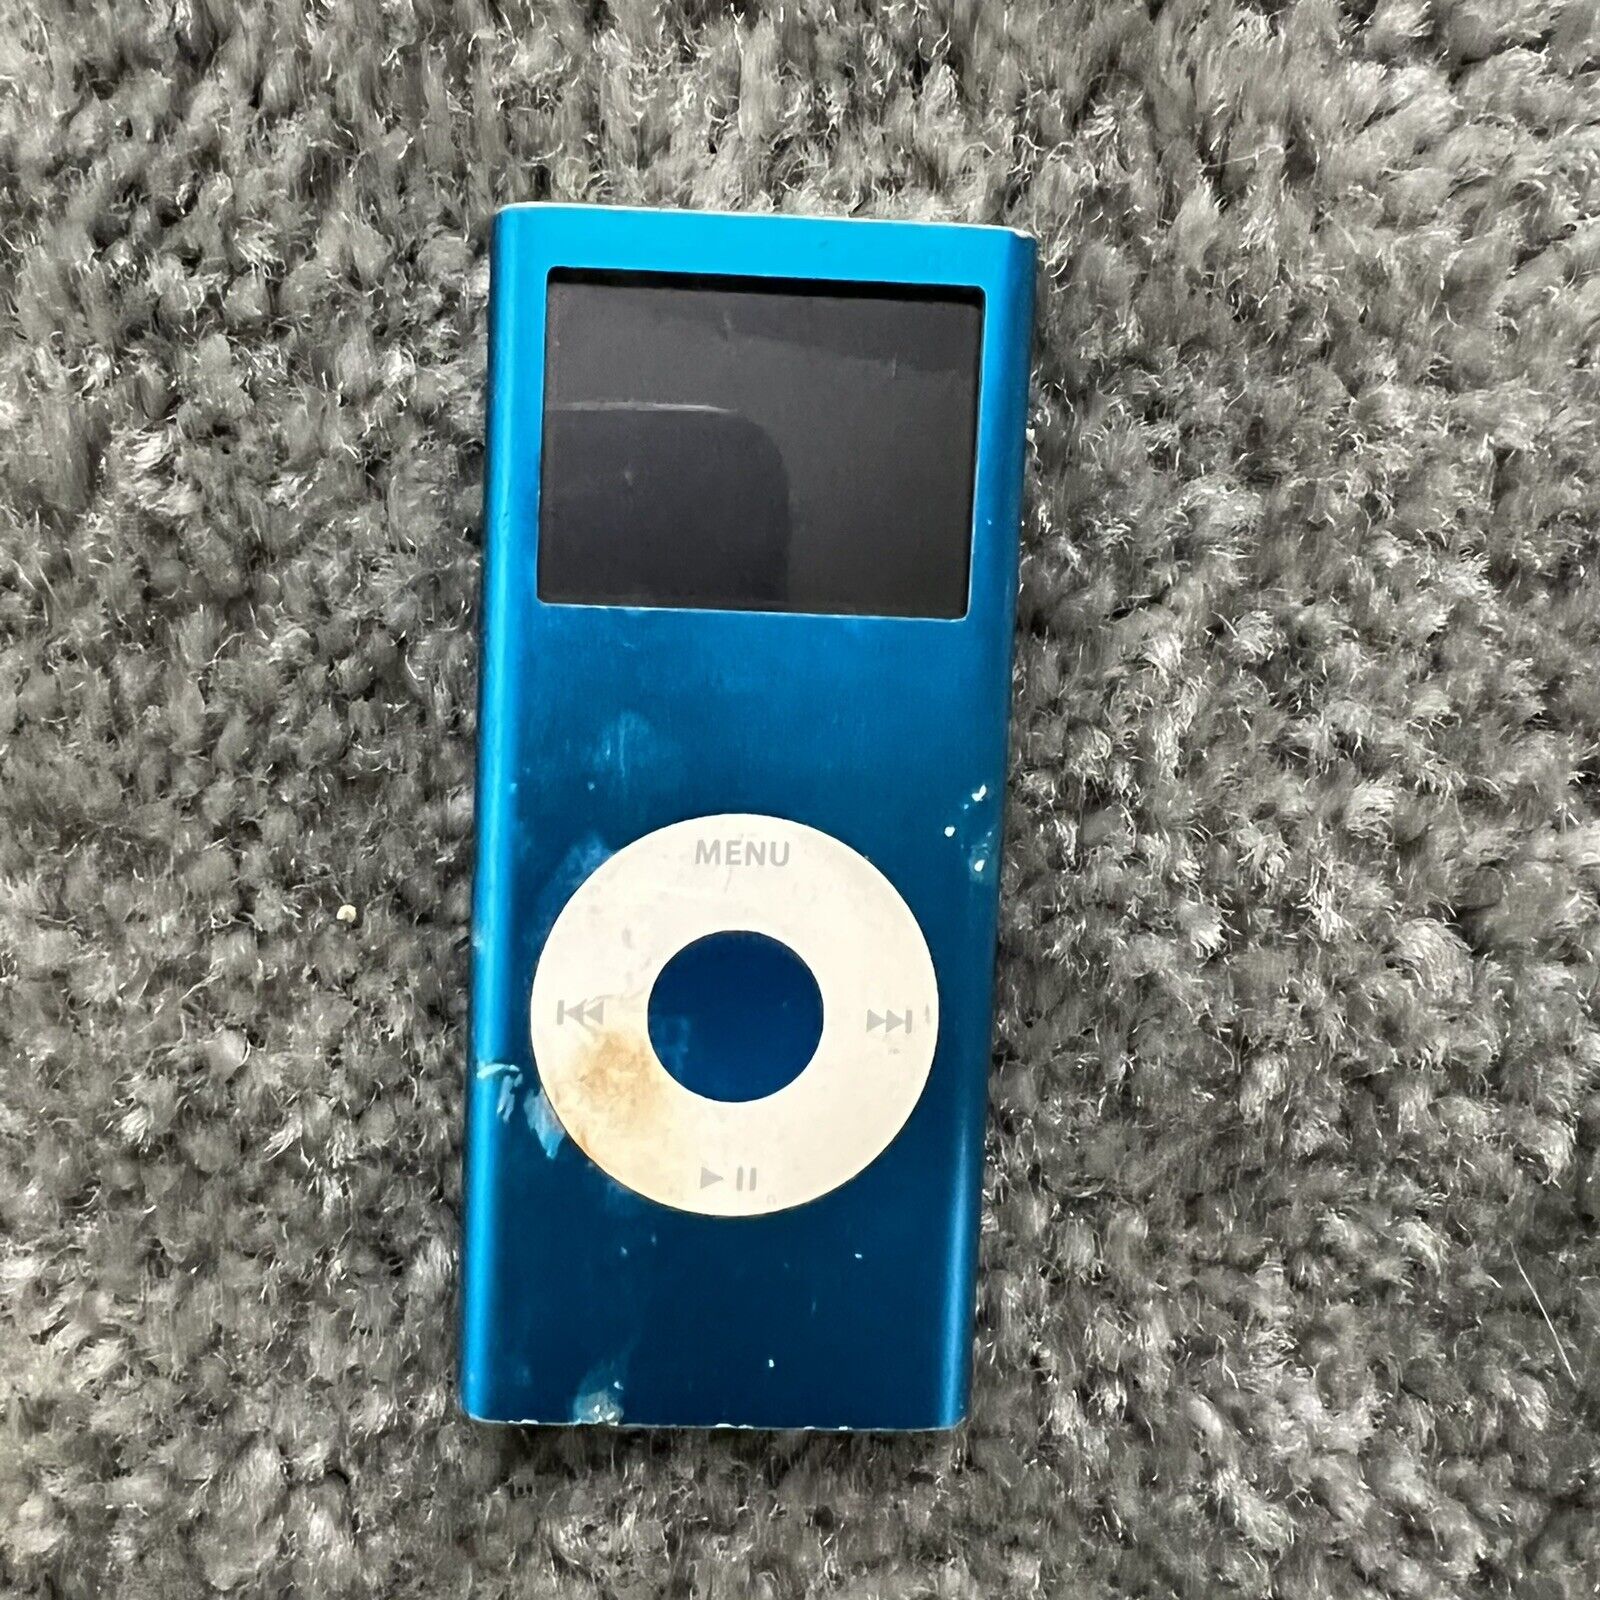 Apple Ipod Nano 2nd Generation A1199 4gb Music Blue As Is Untested No Charger